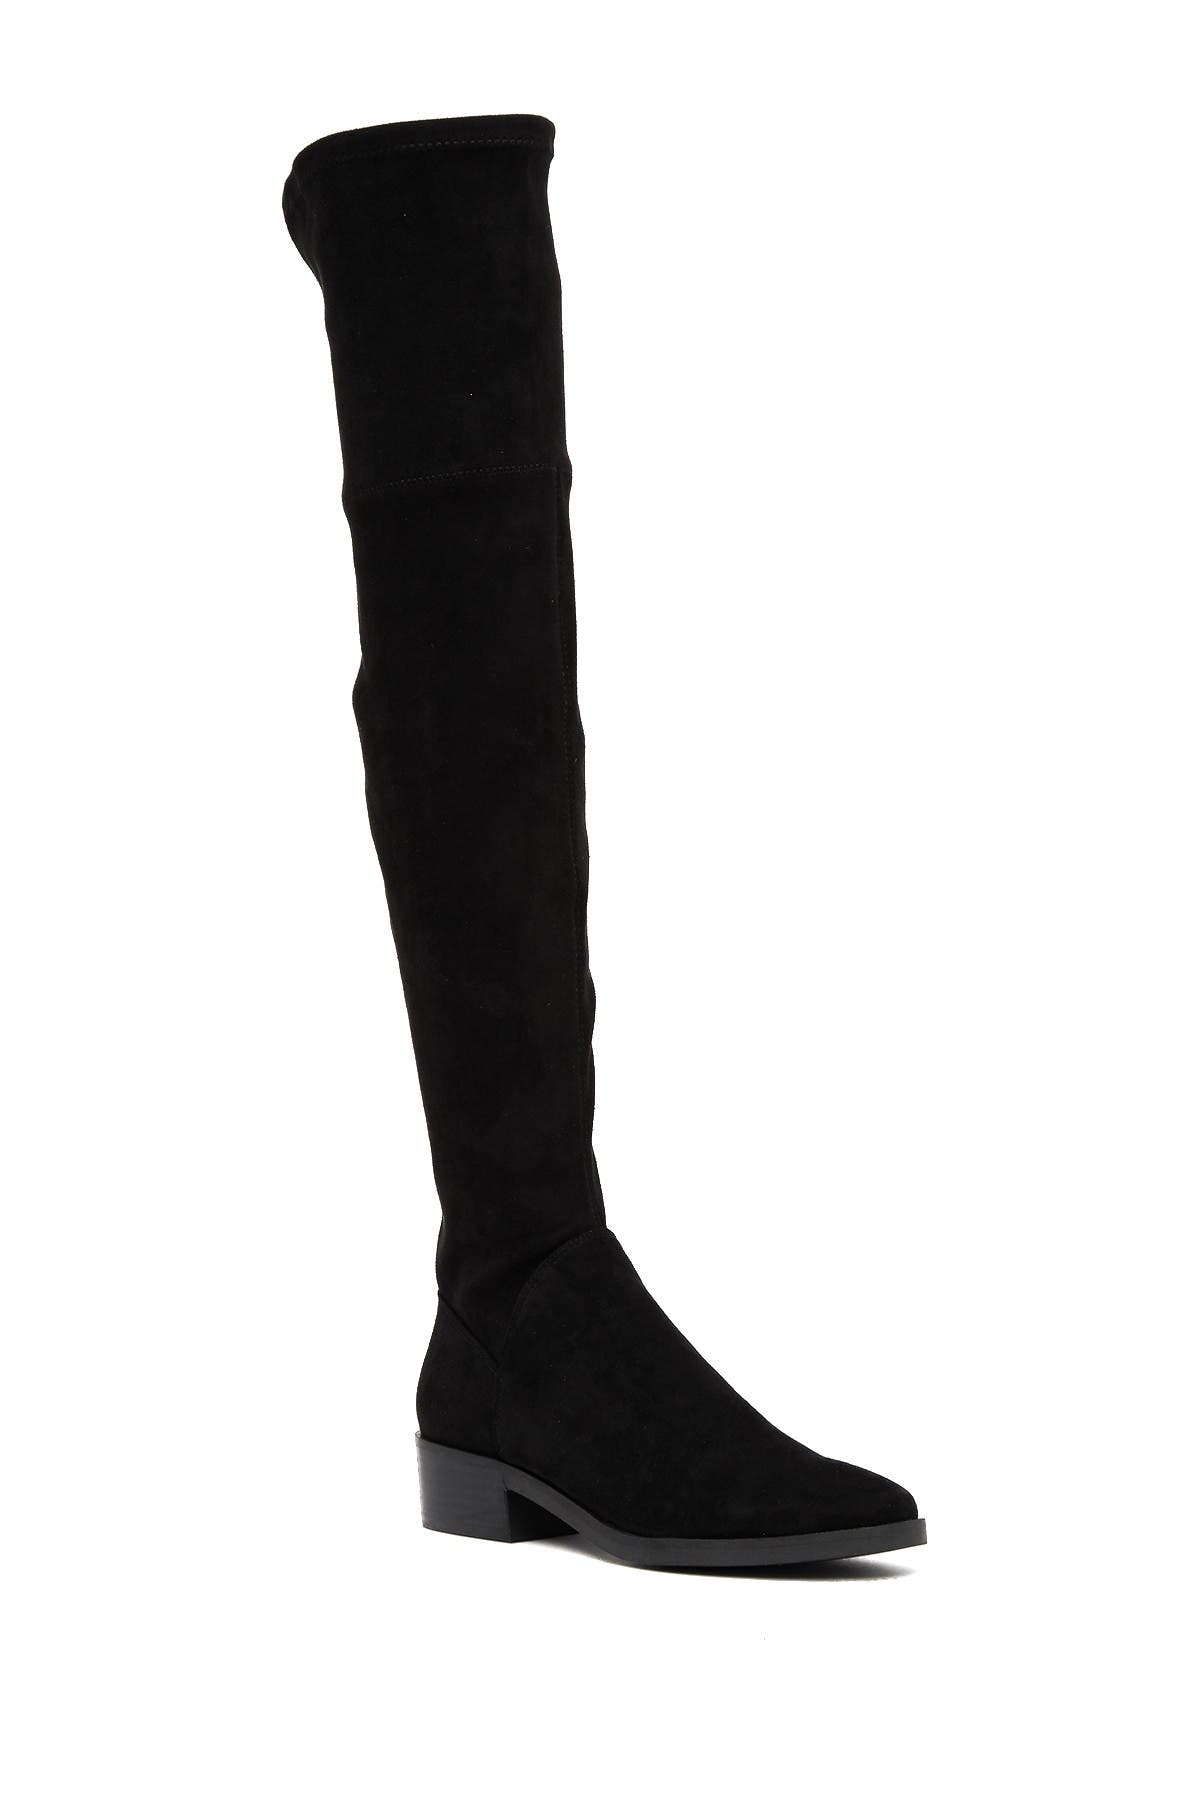 nordstrom rack thigh high boots